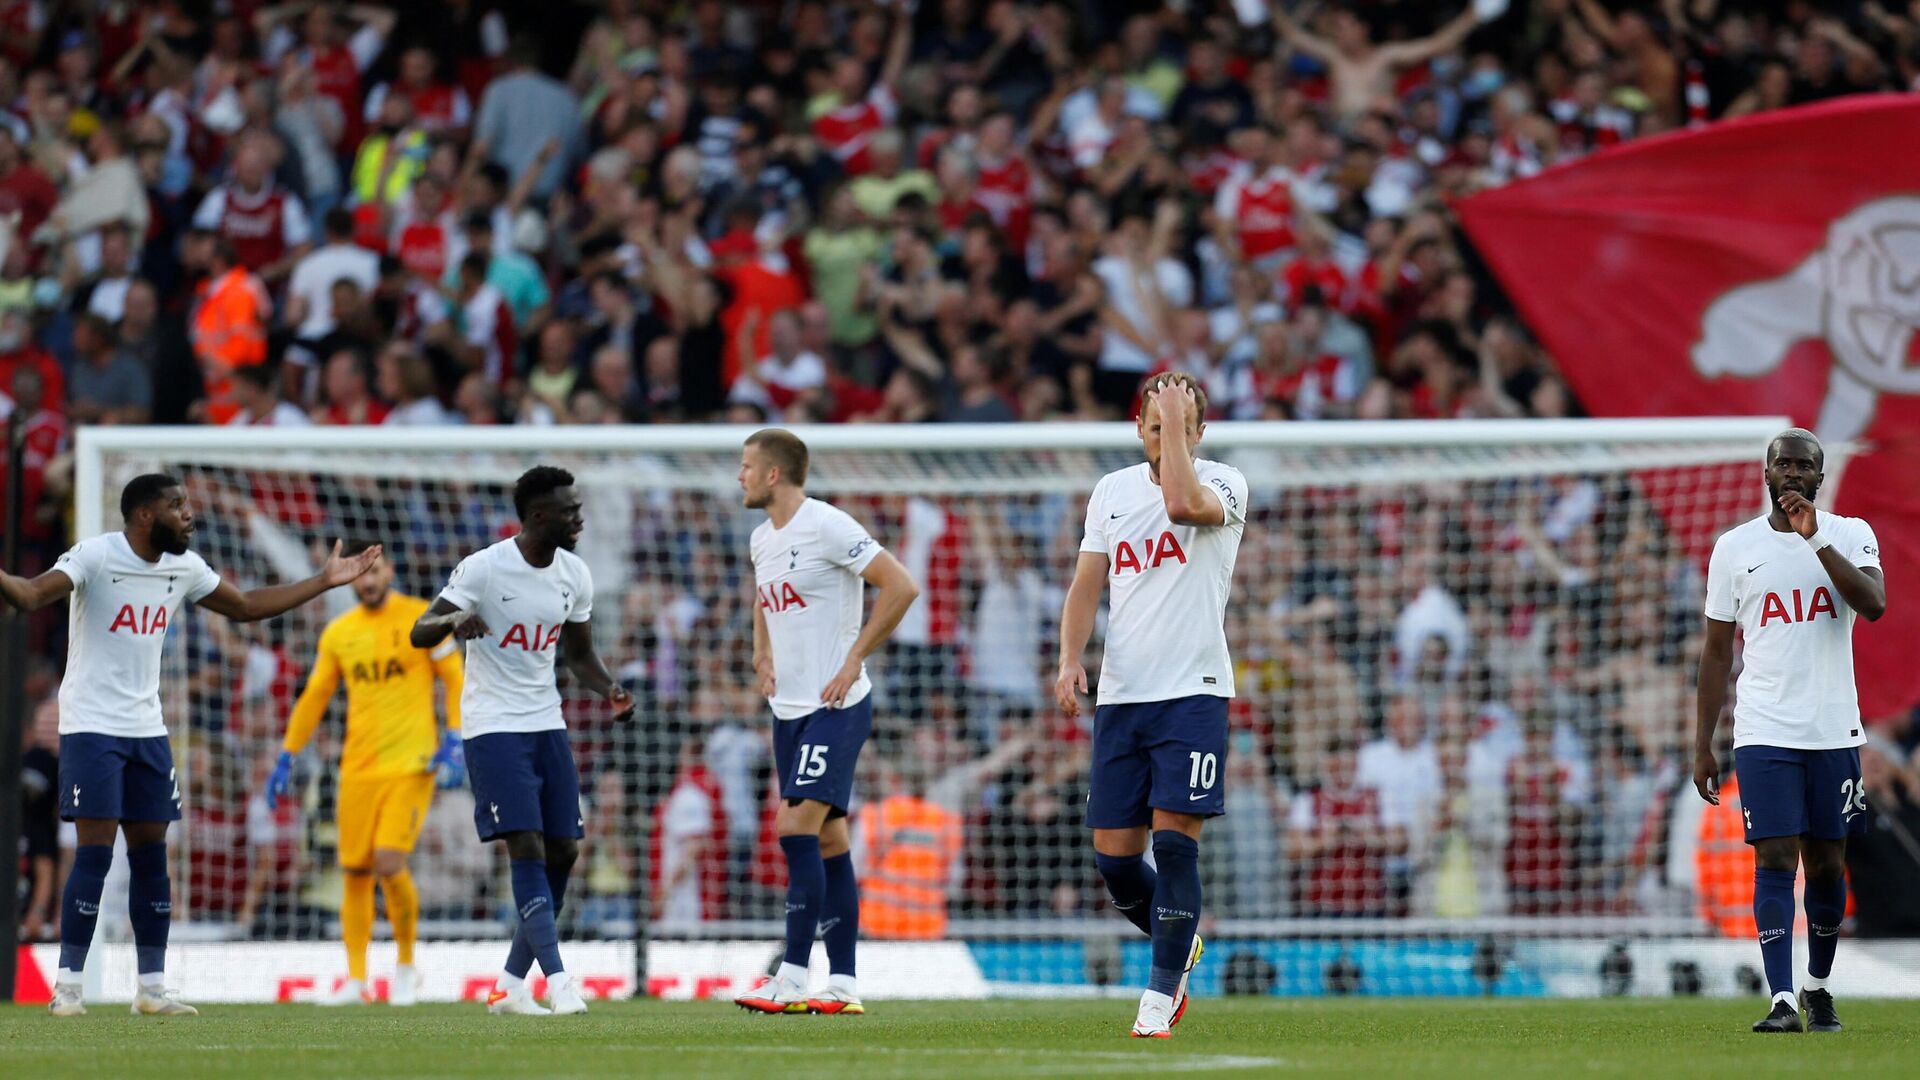 Tottenham Hotspur's English striker Harry Kane (C) and teammates react after conceding a third goal during the English Premier League football match between Arsenal and Tottenham Hotspur at the Emirates Stadium in London on September 26, 2021. (Photo by Ian KINGTON / IKIMAGES / AFP) / RESTRICTED TO EDITORIAL USE. No use with unauthorized audio, video, data, fixture lists, club/league logos or 'live' services. Online in-match use limited to 45 images, no video emulation. No use in betting, games or single club/league/player publications. - РИА Новости, 1920, 15.01.2022